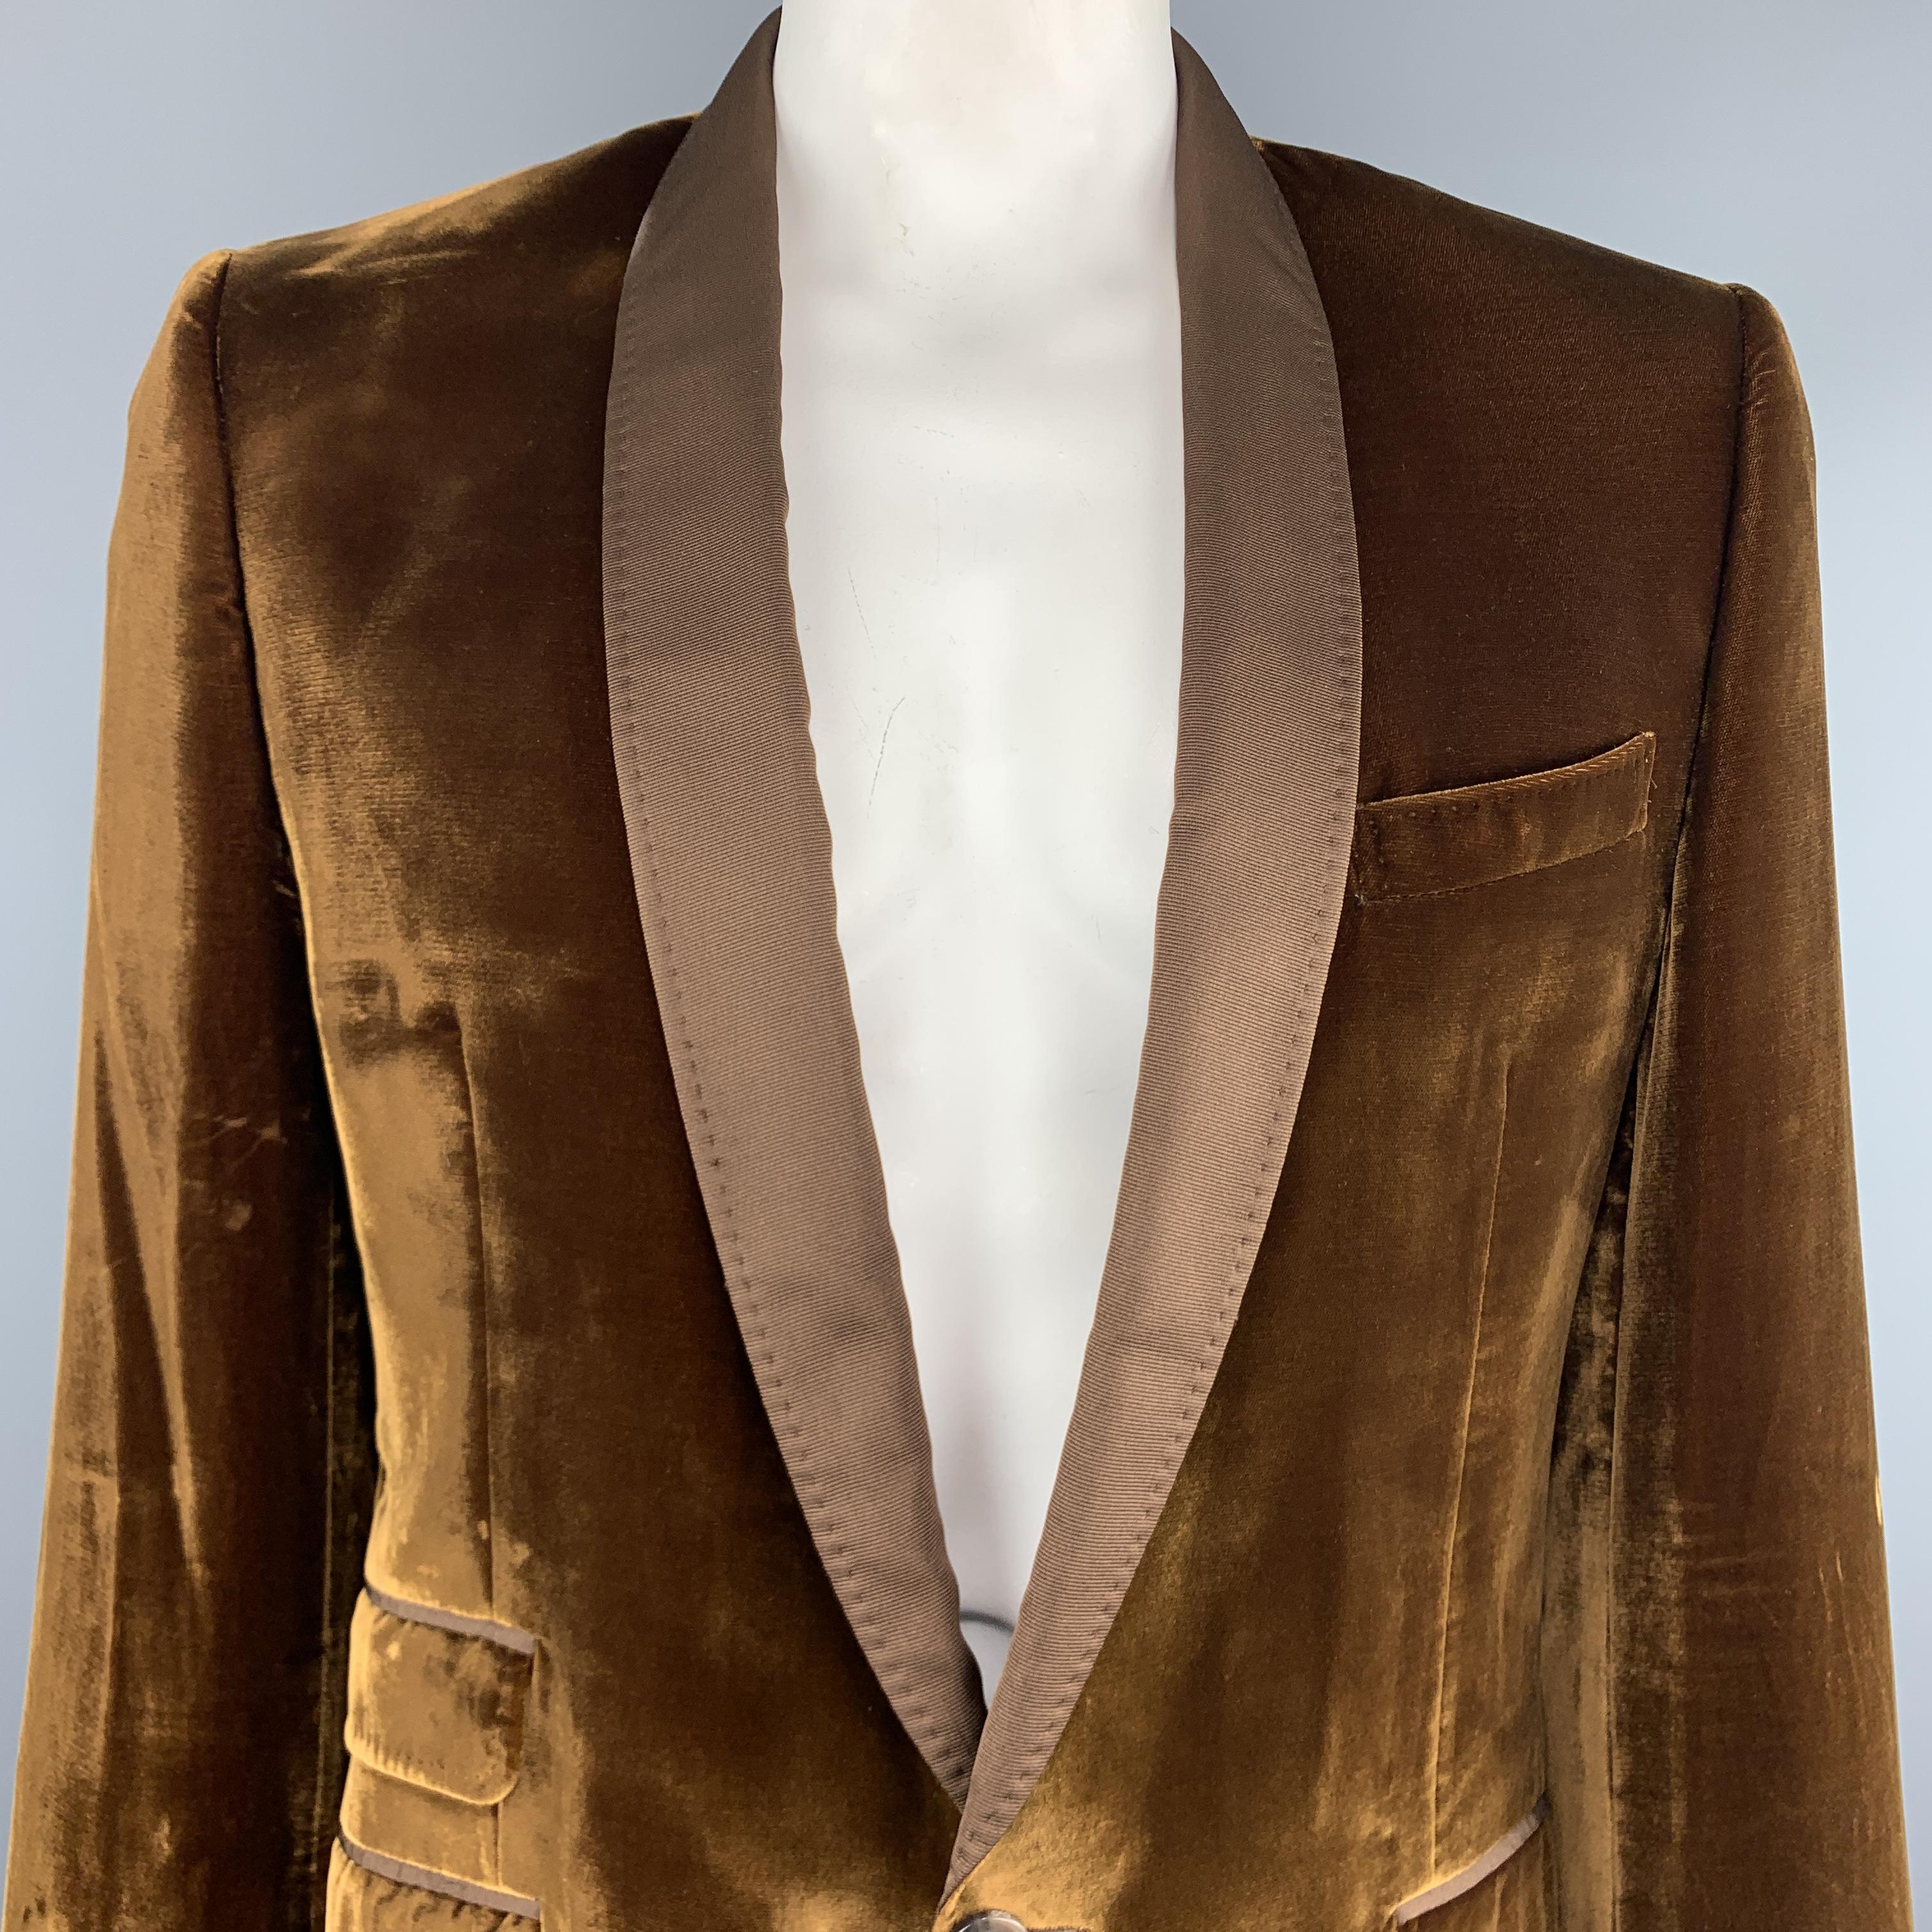 D&G by DOLCE & GABBANA dinner jacket comes in copper velvet with top stitching throughout, tonal faille shawl collar, single breasted one button front, and triple flap pockets. Wear throughout velvet. As-is. Made in Italy.

Good Pre-Owned